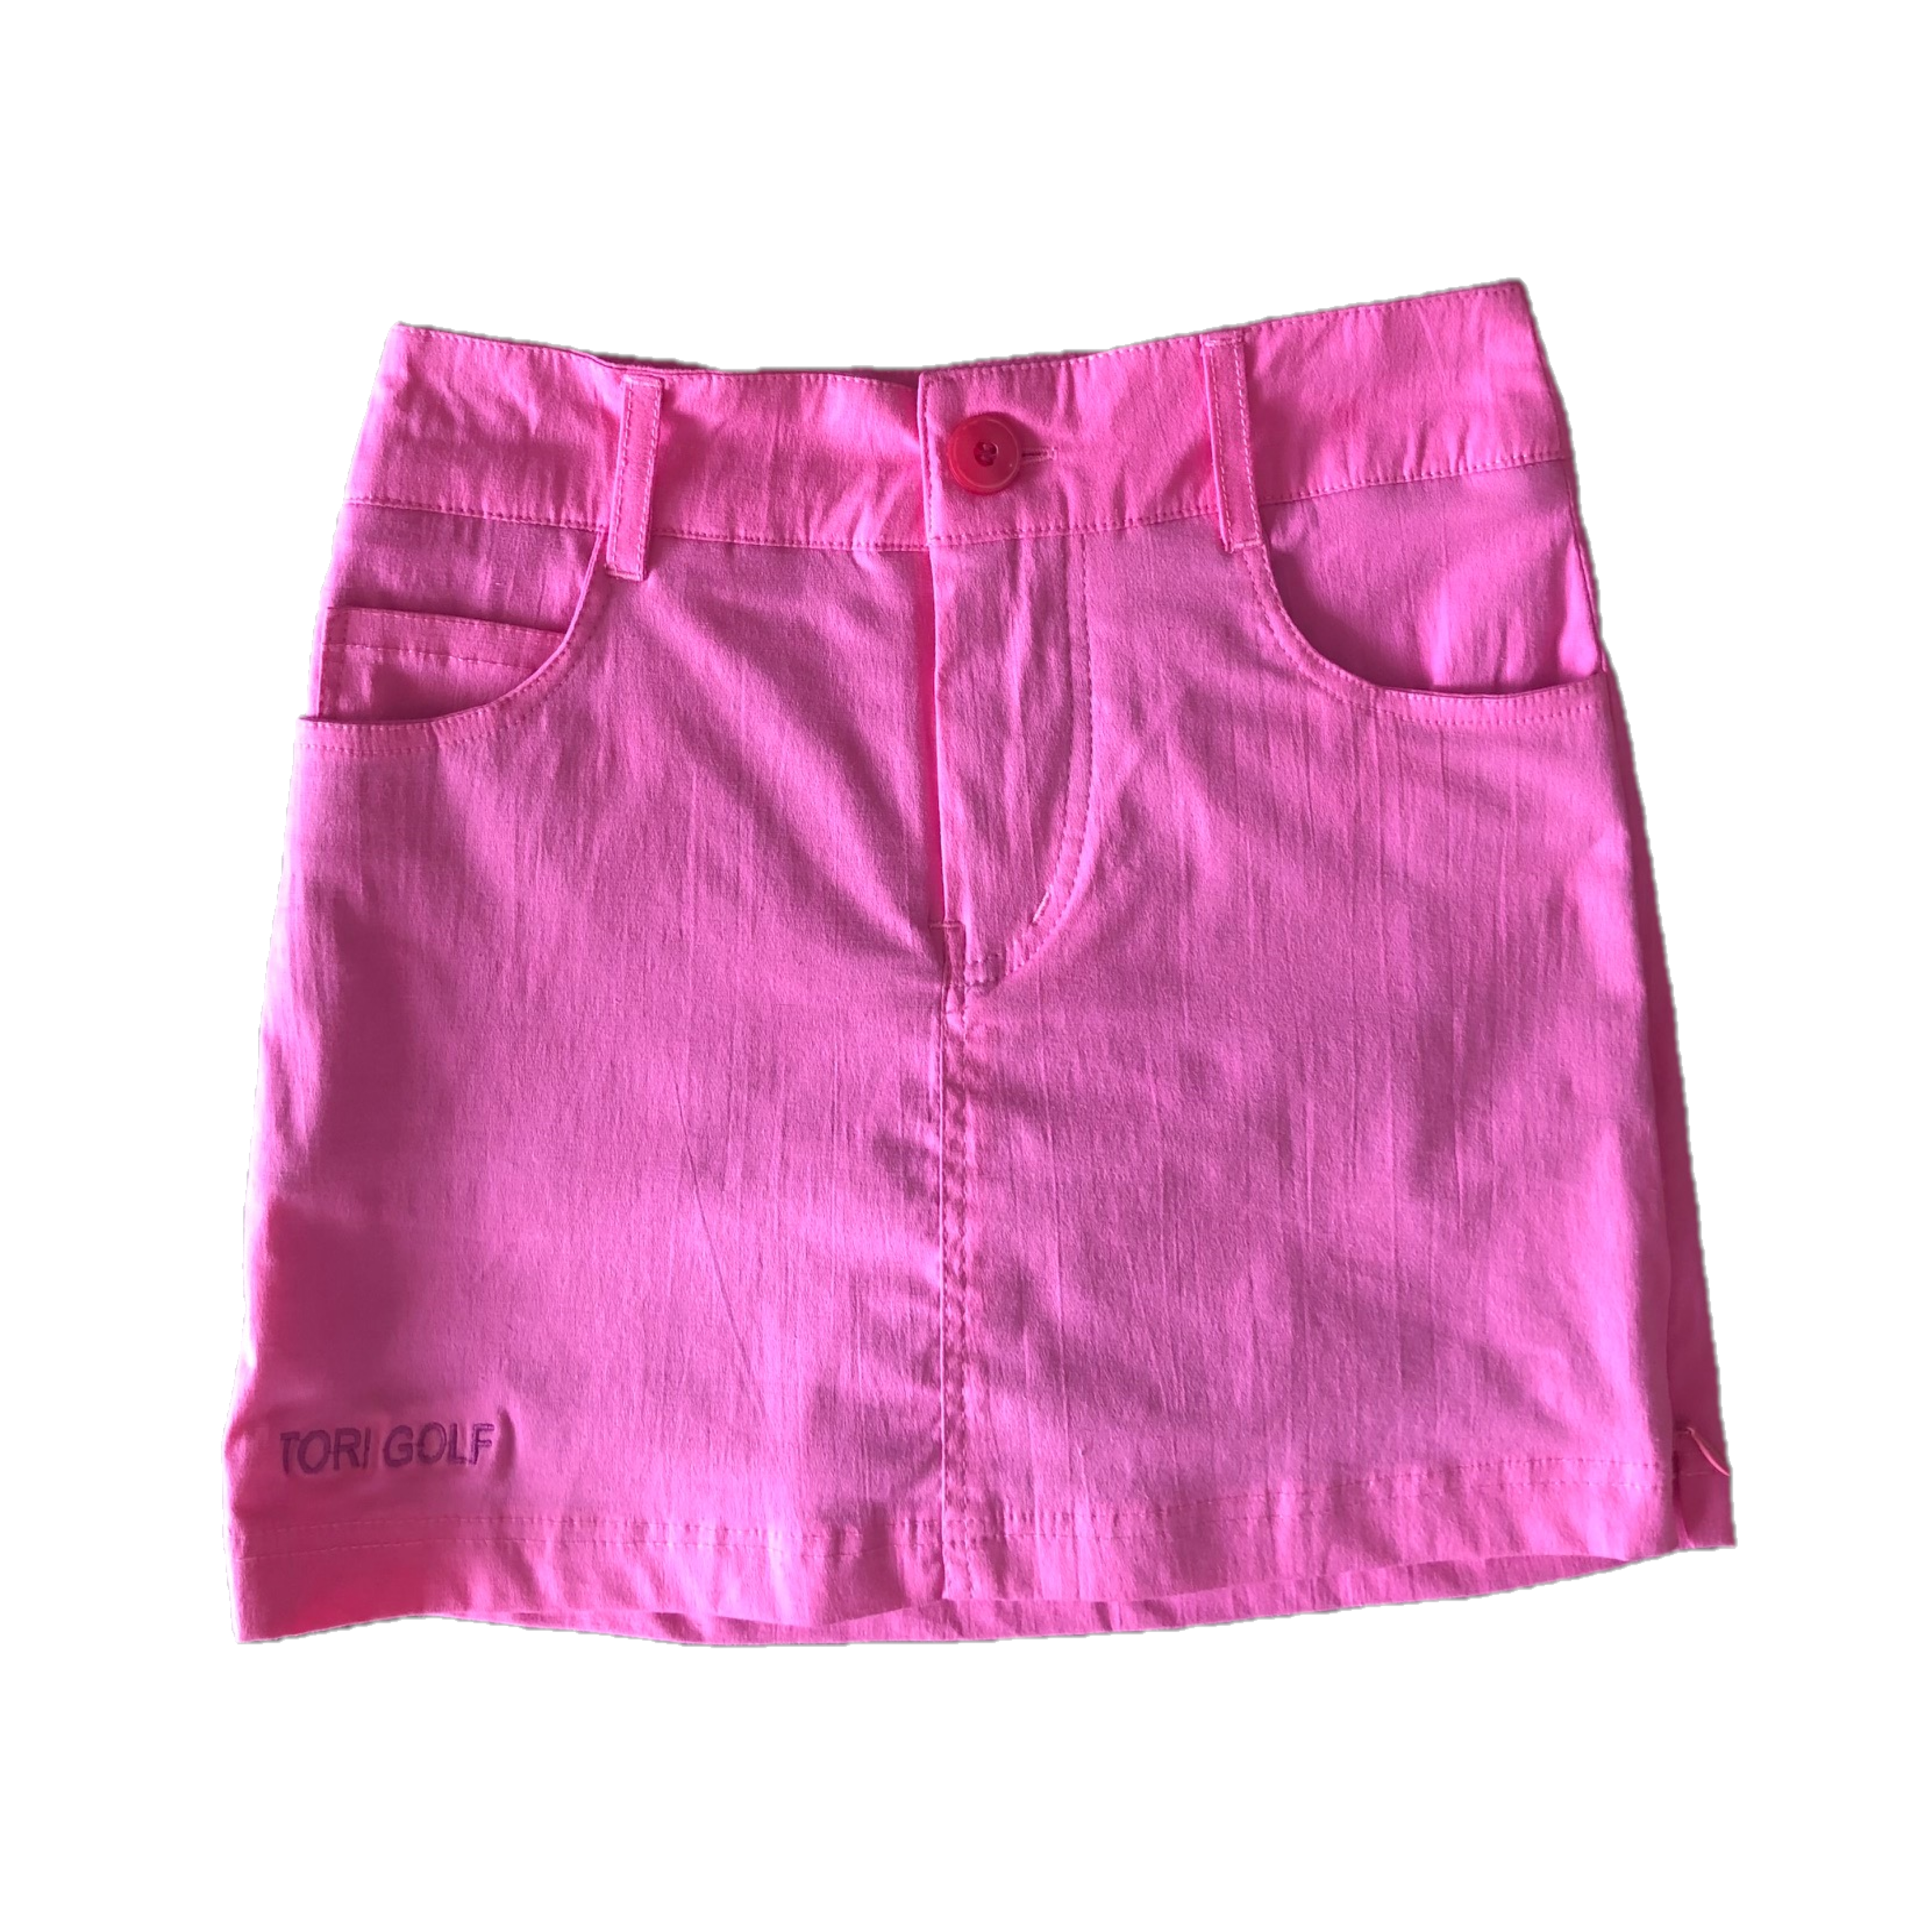 LS – 021C || Skirt Pale Bright Pink With 2 Round Front Pockets 2 Rear Patch Front Zipper And 2 Zipped Side Vents.